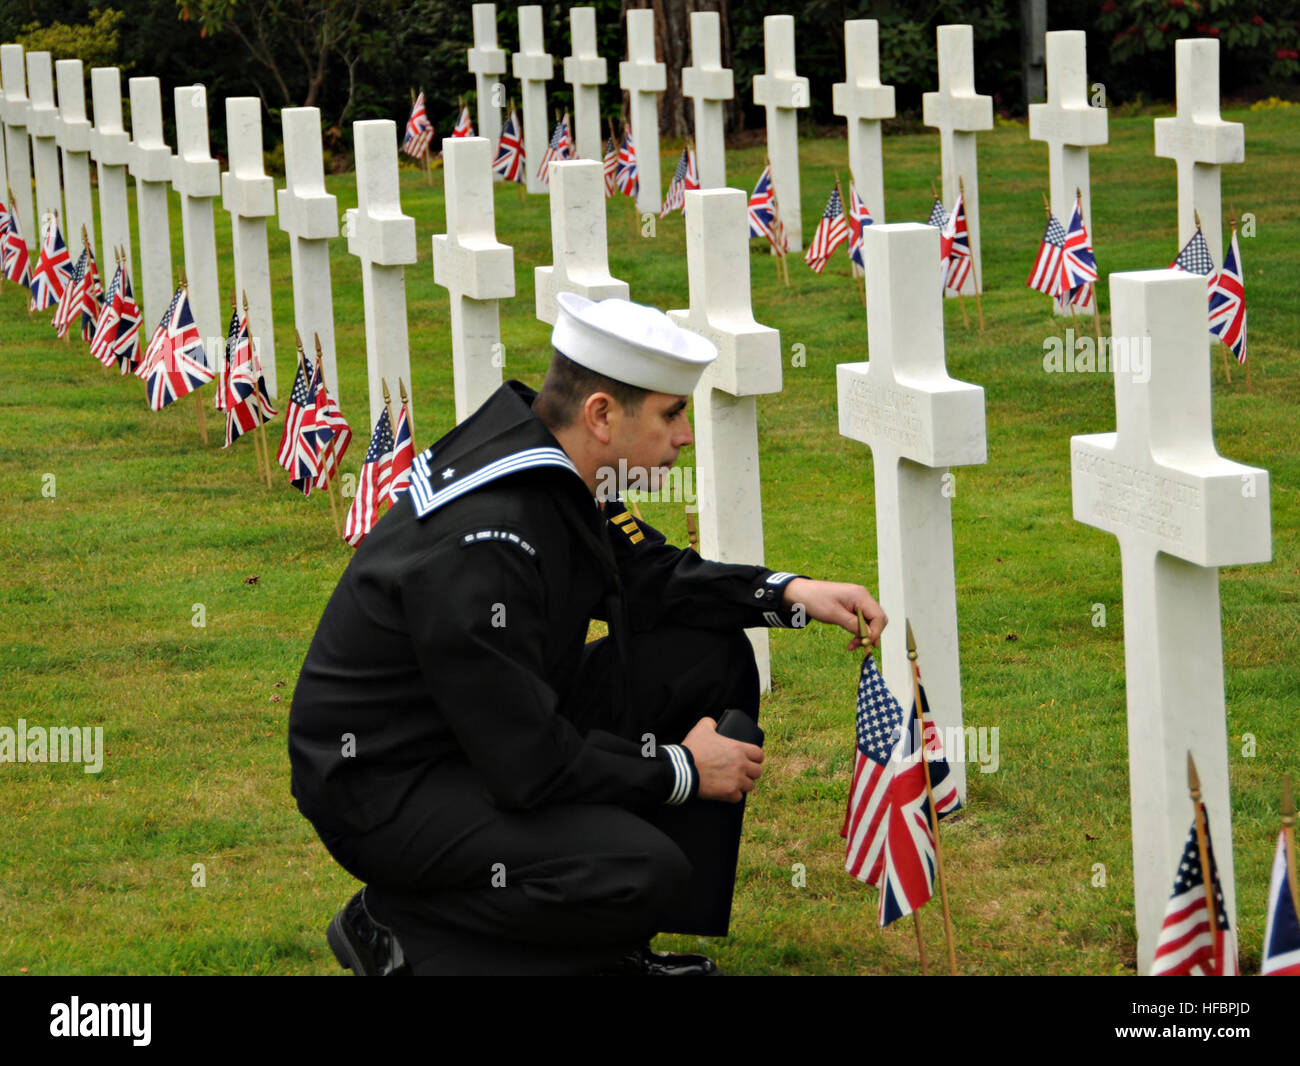 110529-N-PE140-126 BROOKWOOD, England (May 29, 2011) Ship's Serviceman 1st Class Samuel Hernandez-Moreno, assigned to the aircraft carrier USS George H.W. Bush (CVN 77), pays his respects to a fallen service member buried at the Brookwood American Cemetery and Memorial on Memorial Day. George H.W. Bush is anchored off the coast of Portsmouth, England, for the ship's first overseas port visit of its first combat deployment. (U.S. Navy photo by Mass Communication Specialist 2nd Class Jennifer L. Jaqua/Released)  - Official U.S. Navy Imagery - Sailor pays his respects to a fallen service member b Stock Photo